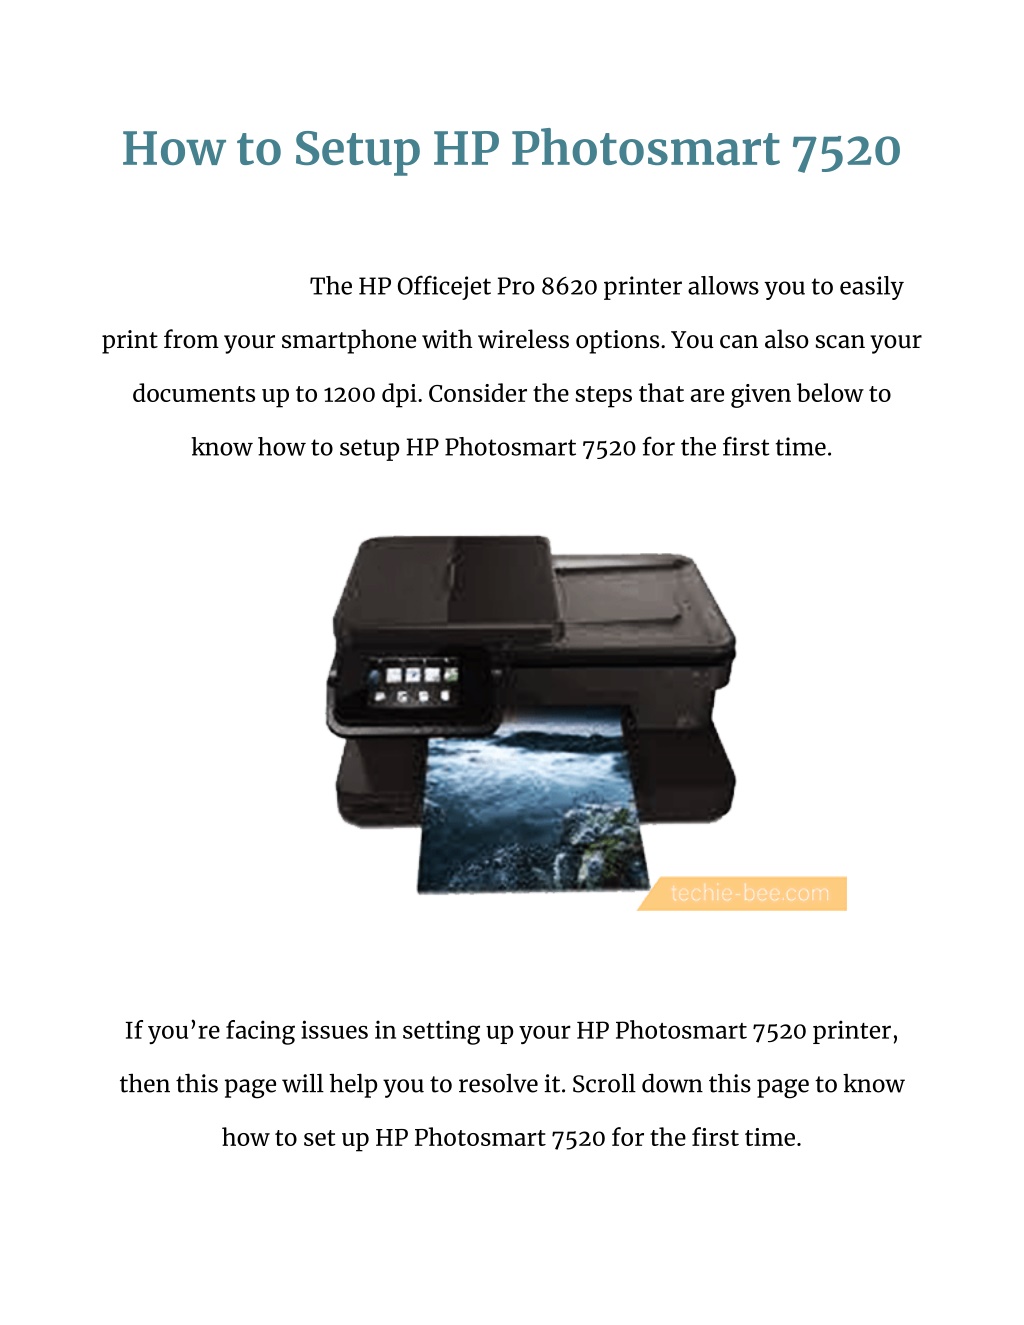 Ppt How To Setup Hp Photosmart 7520 Get Our Simple Instructions Powerpoint Presentation 7055